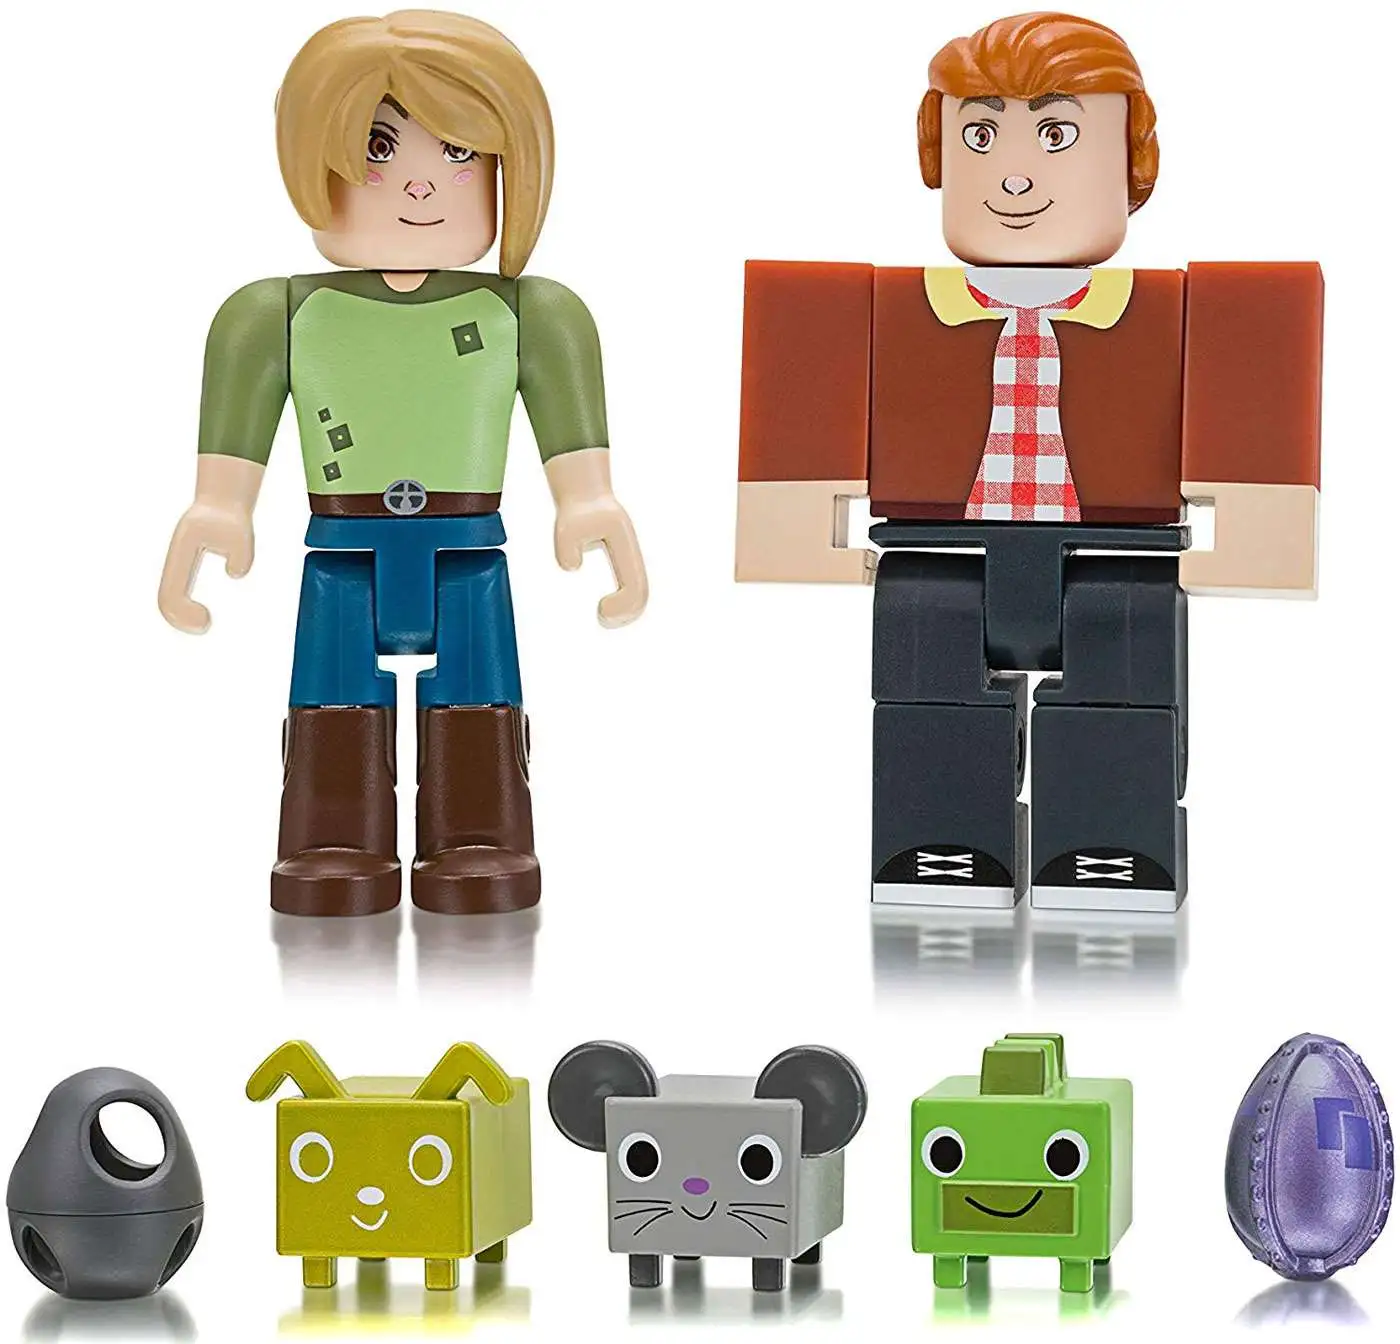 Roblox Celebrity Collection - Pet Show Game Packs (Includes